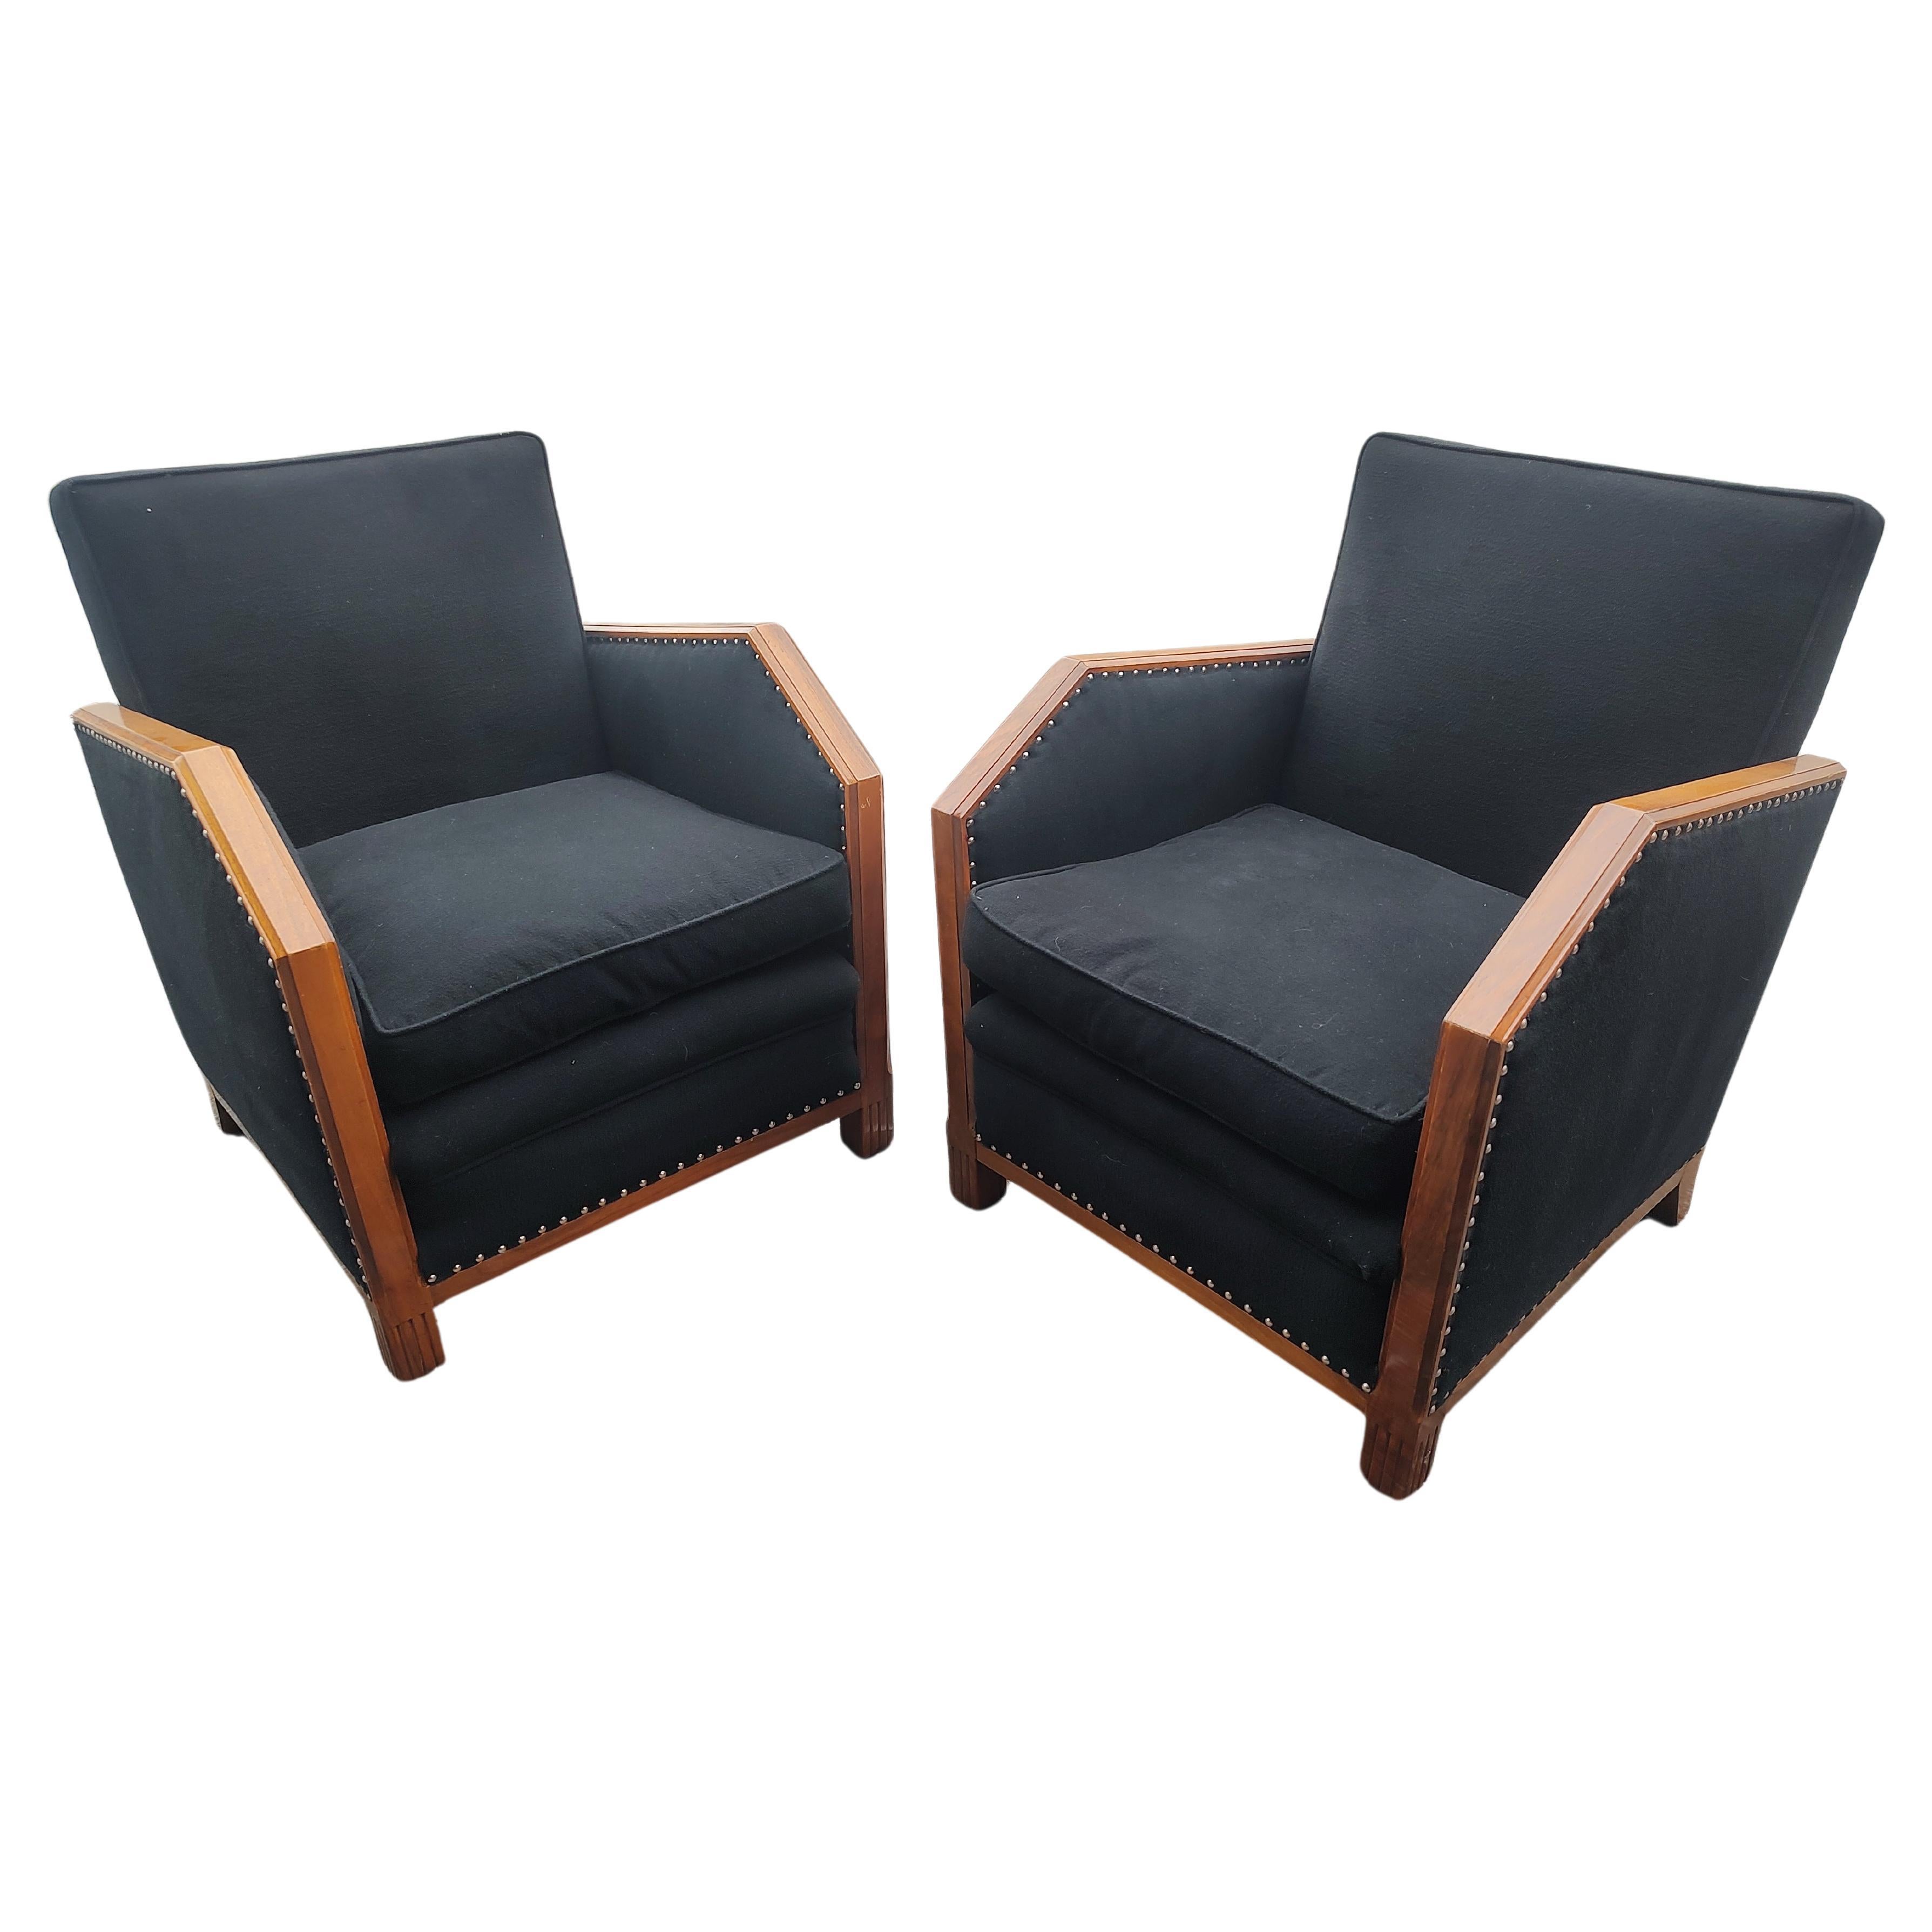 Fabulous pair of Art Deco Rosewood with felt upholstery lined with brass upholstery tacks
 Beautiful lines and fantastic wood grain in the rosewood frames. Felt Upholstery is fairly new and in very good condition. Priced and sold as a pair.